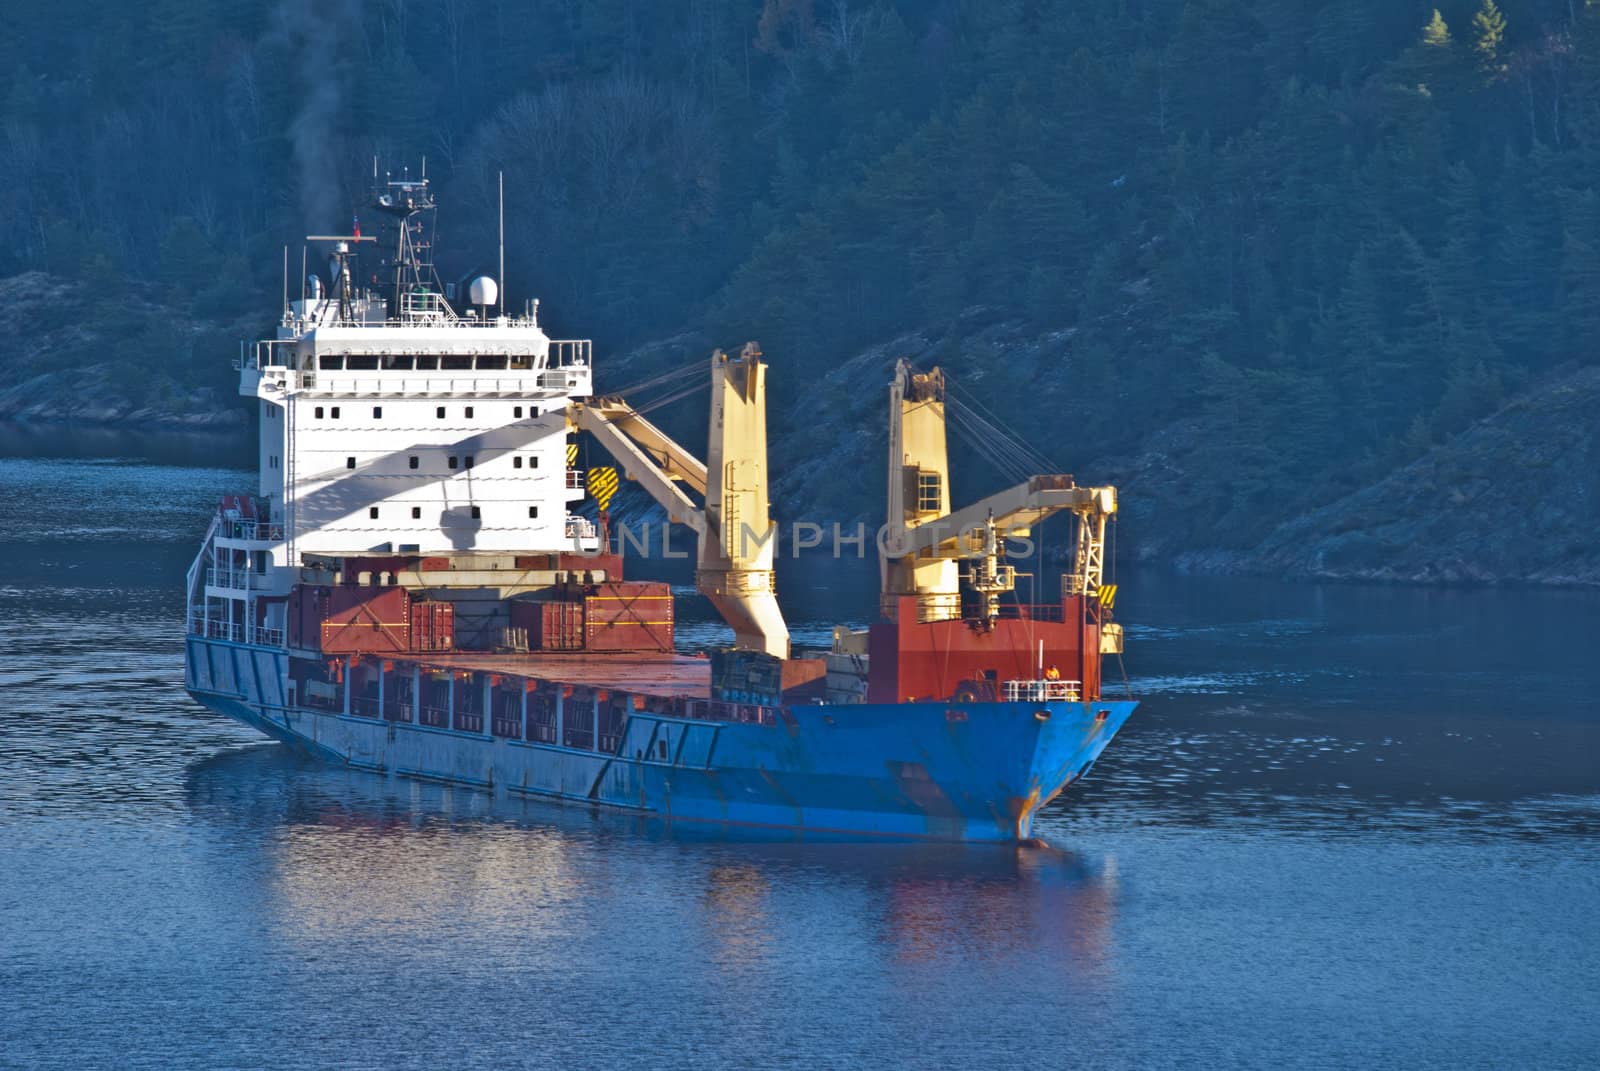 large vessels in ringdalsfjord, image 8 by steirus